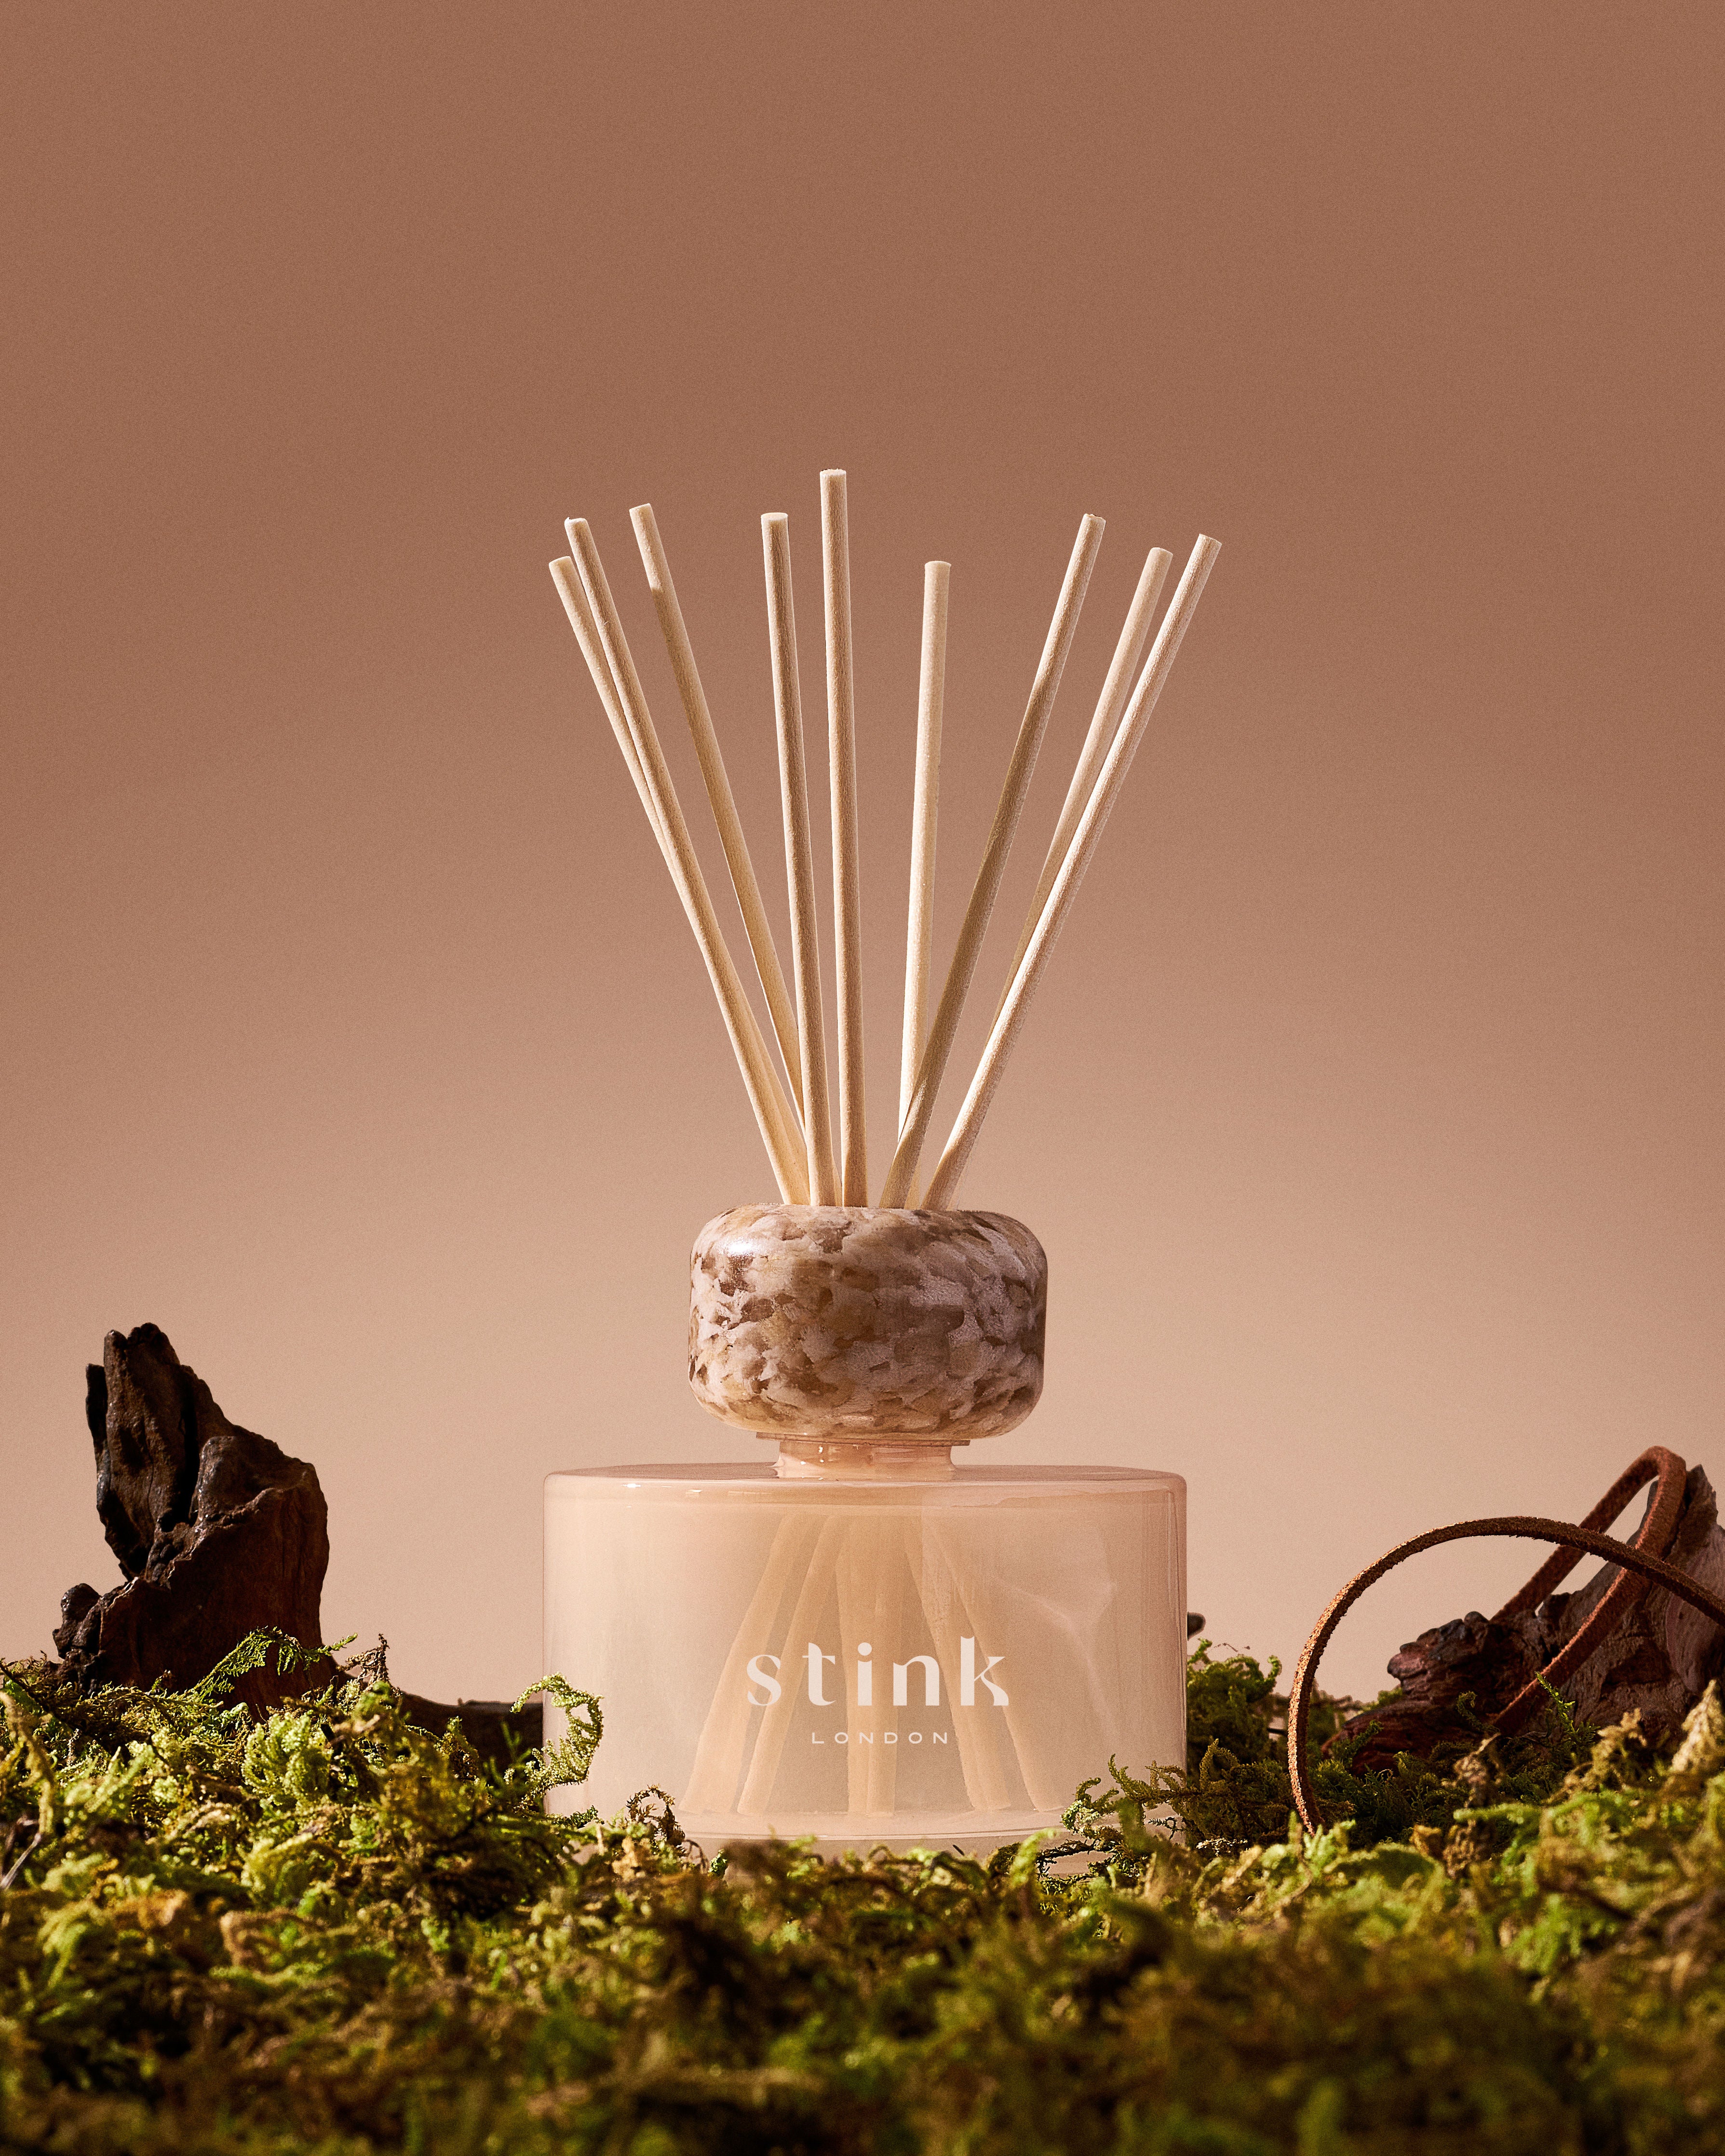 Stink London reed diffusers - mothers day perfect gift  home fragrance subscription refill pouches, refillable bottles rattan reeds. sustainable scent santal get a room